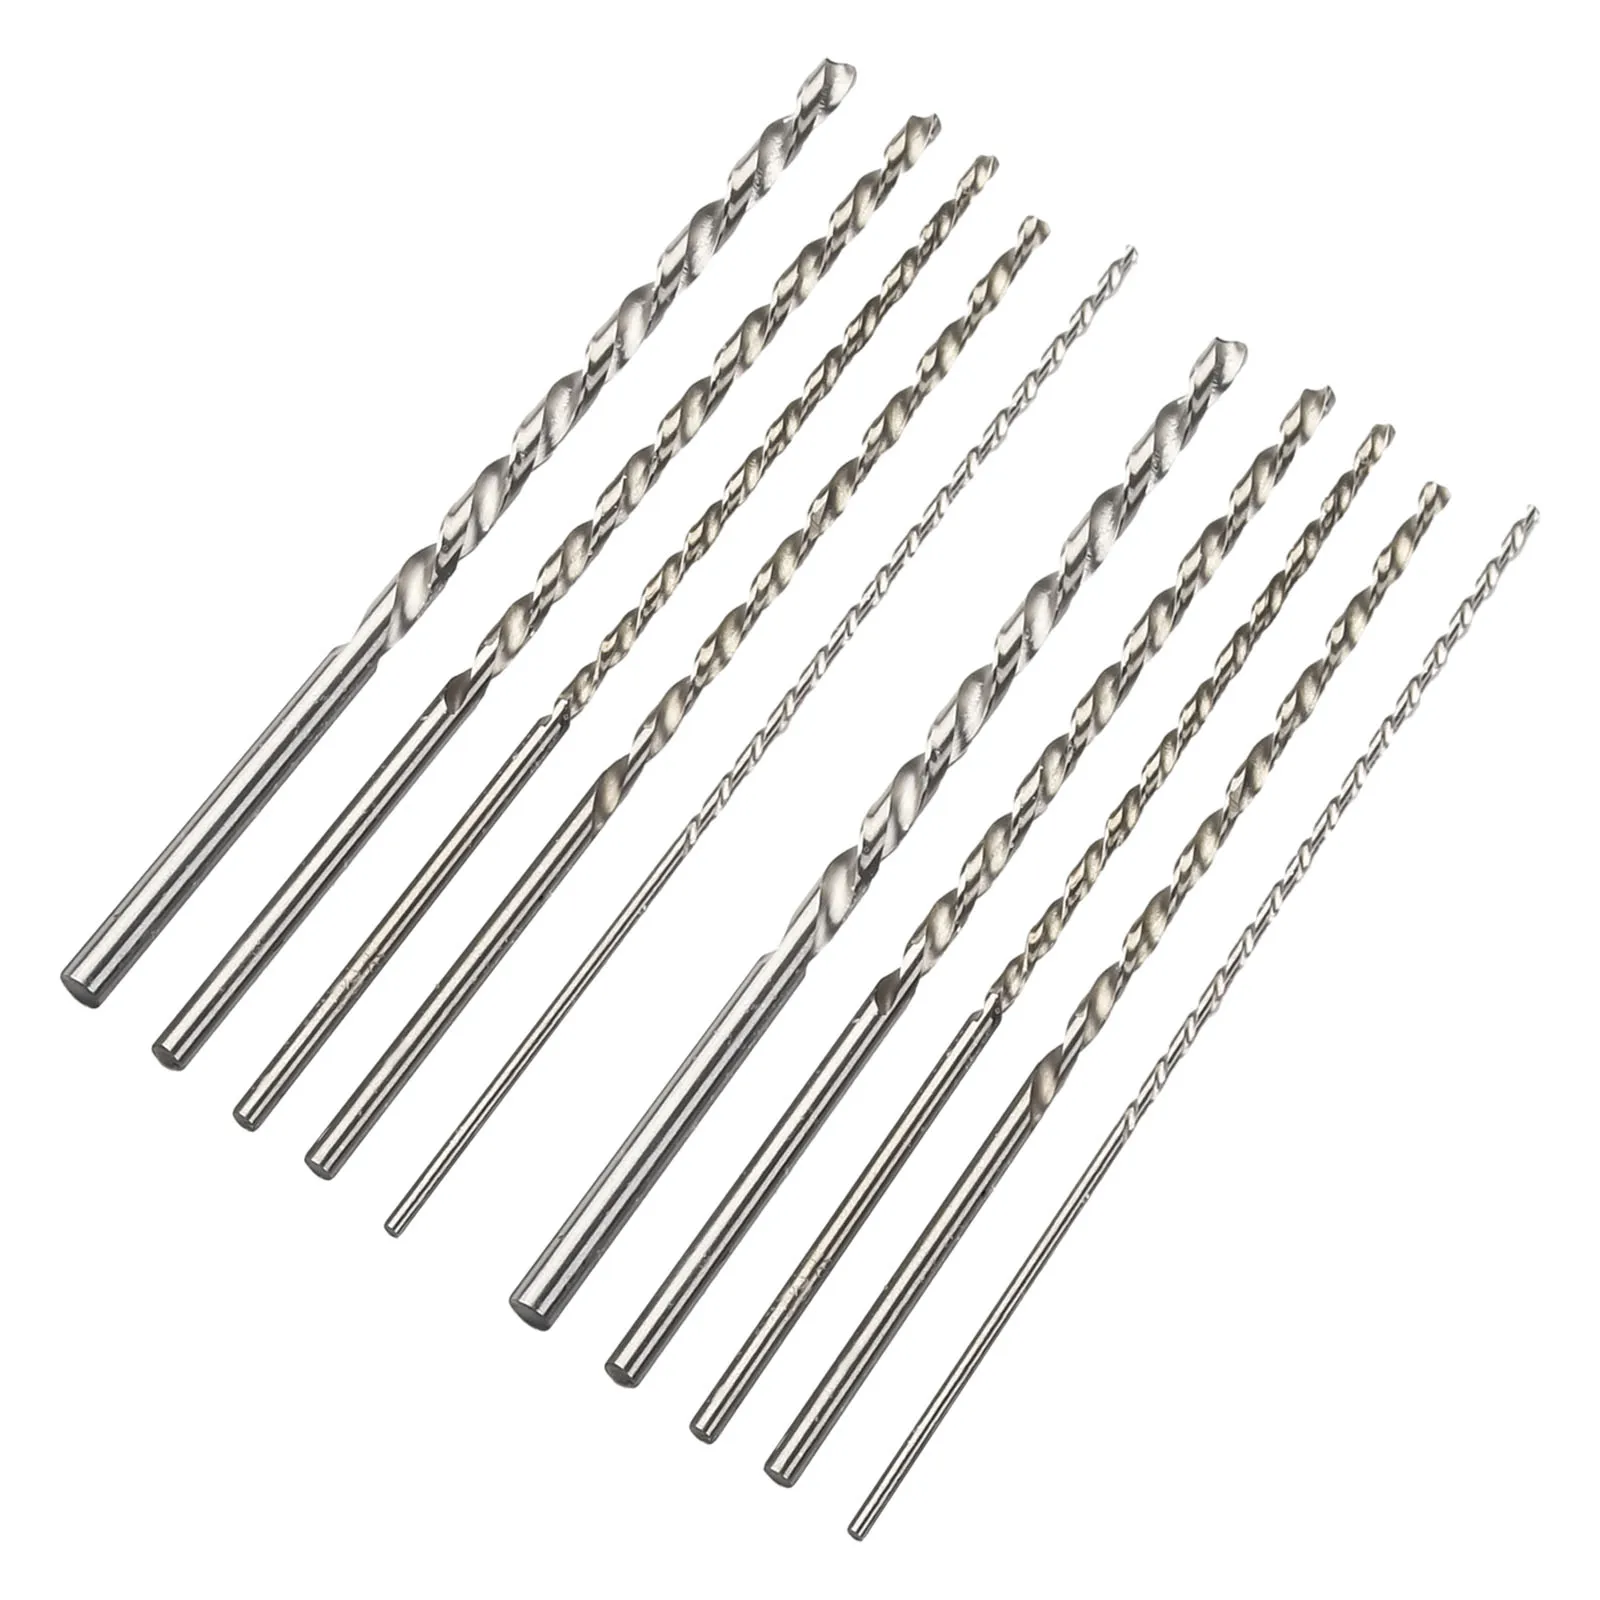 High Speed Steel Bit Set Extra Long HSS Straight Drill Bits Power Tools  For Metal Wood Glass 10Pcs 2mm 3mm 3.5mm 4mm 5mm 4pcs stainless steel glass heated bed clip clamp 3d printer parts heatbed clip for um ulti build platform retainer